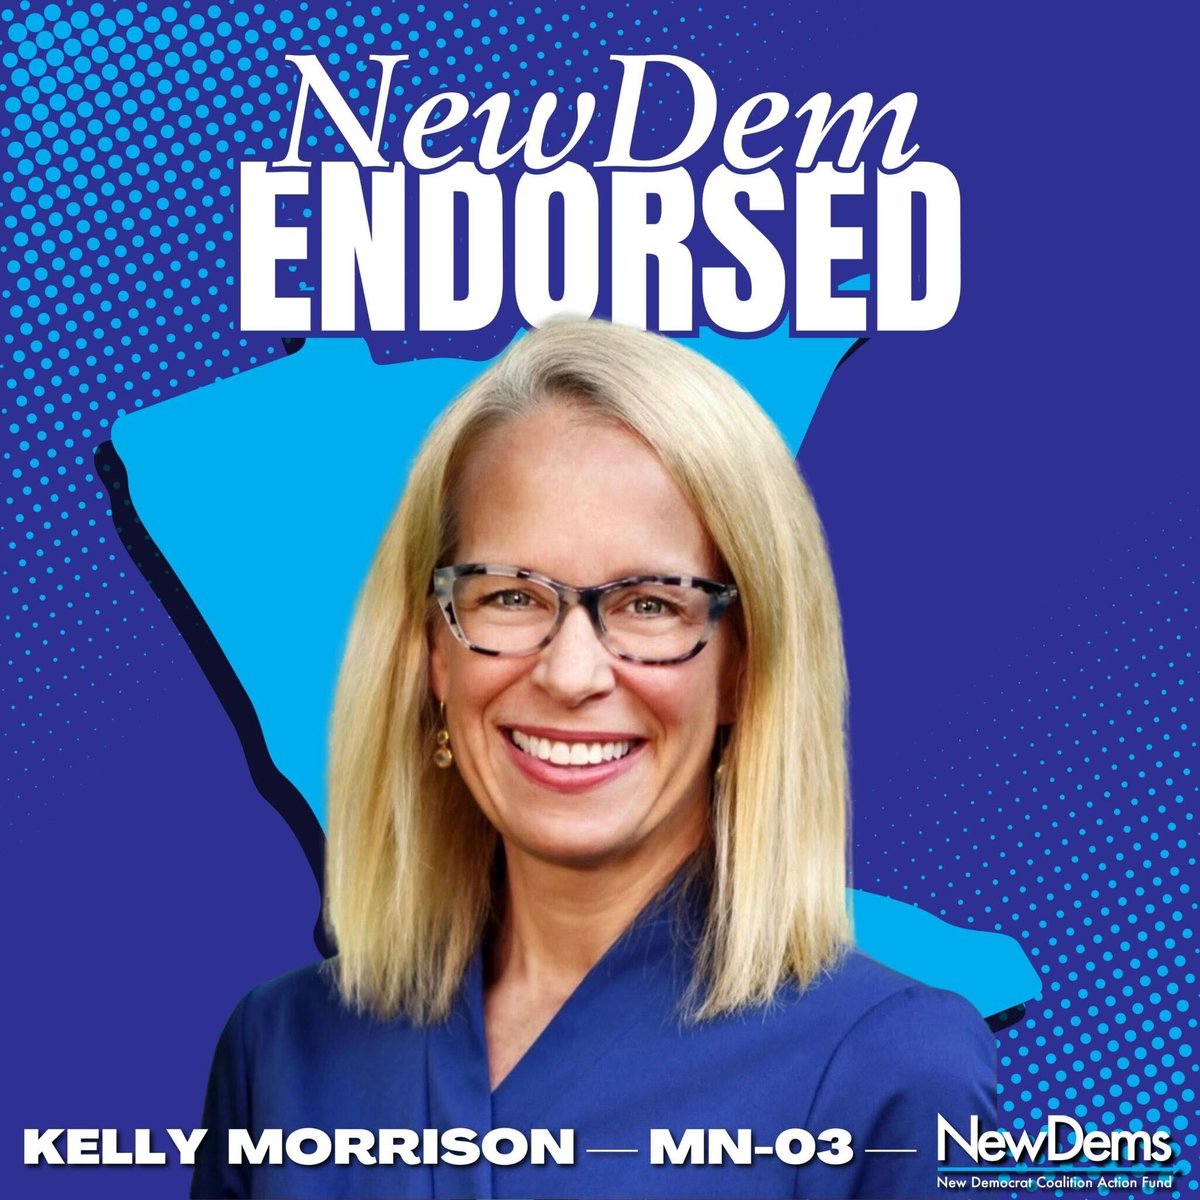 'I believe that our elected officials have a duty to deliver results for the American people that will make a real difference in their lives. 'The NewDem mission to bridge the partisan divide and find real solutions to our nation’s greatest challenges is something that we need